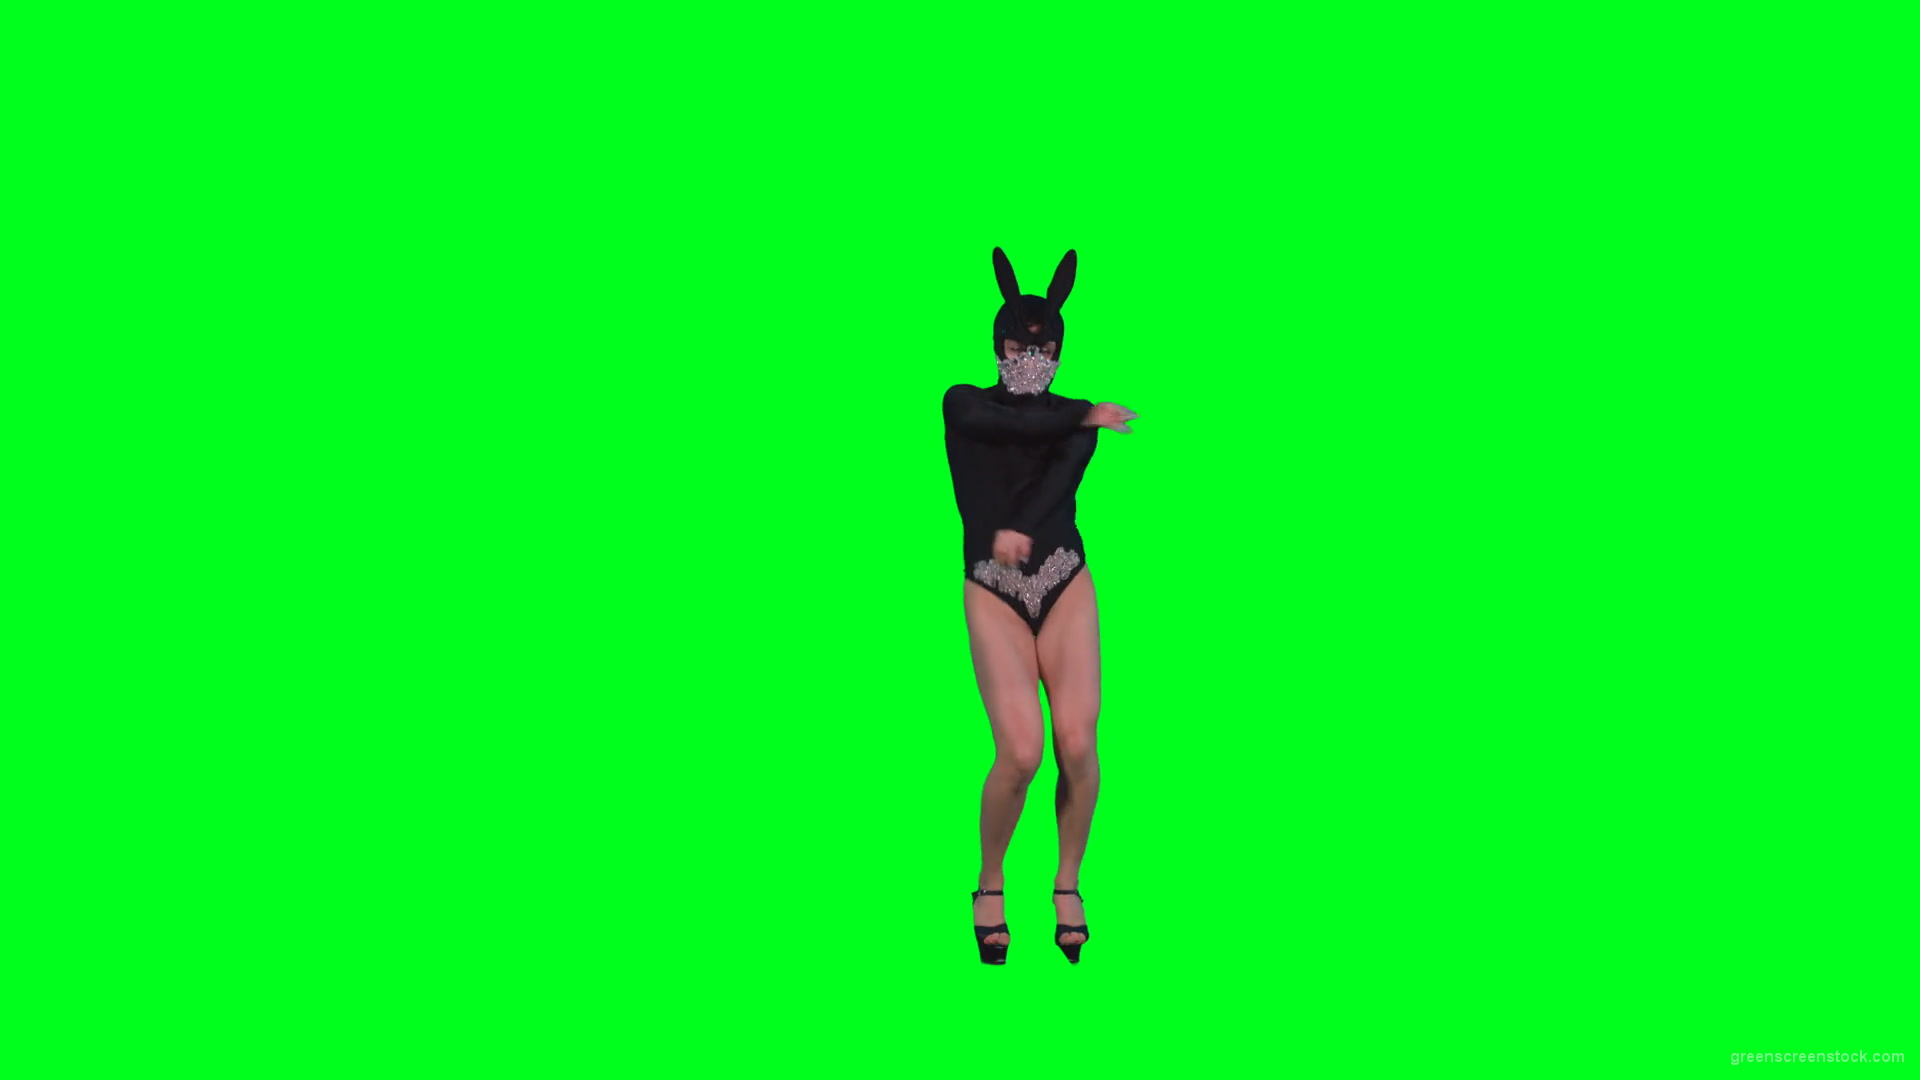 Sexy-dancing-girl-in-rabbit-mask-and-black-fashion-dress-posing-in-fetish-style-isolated-on-green-screen-4K-Video-Footage-1920_004 Green Screen Stock